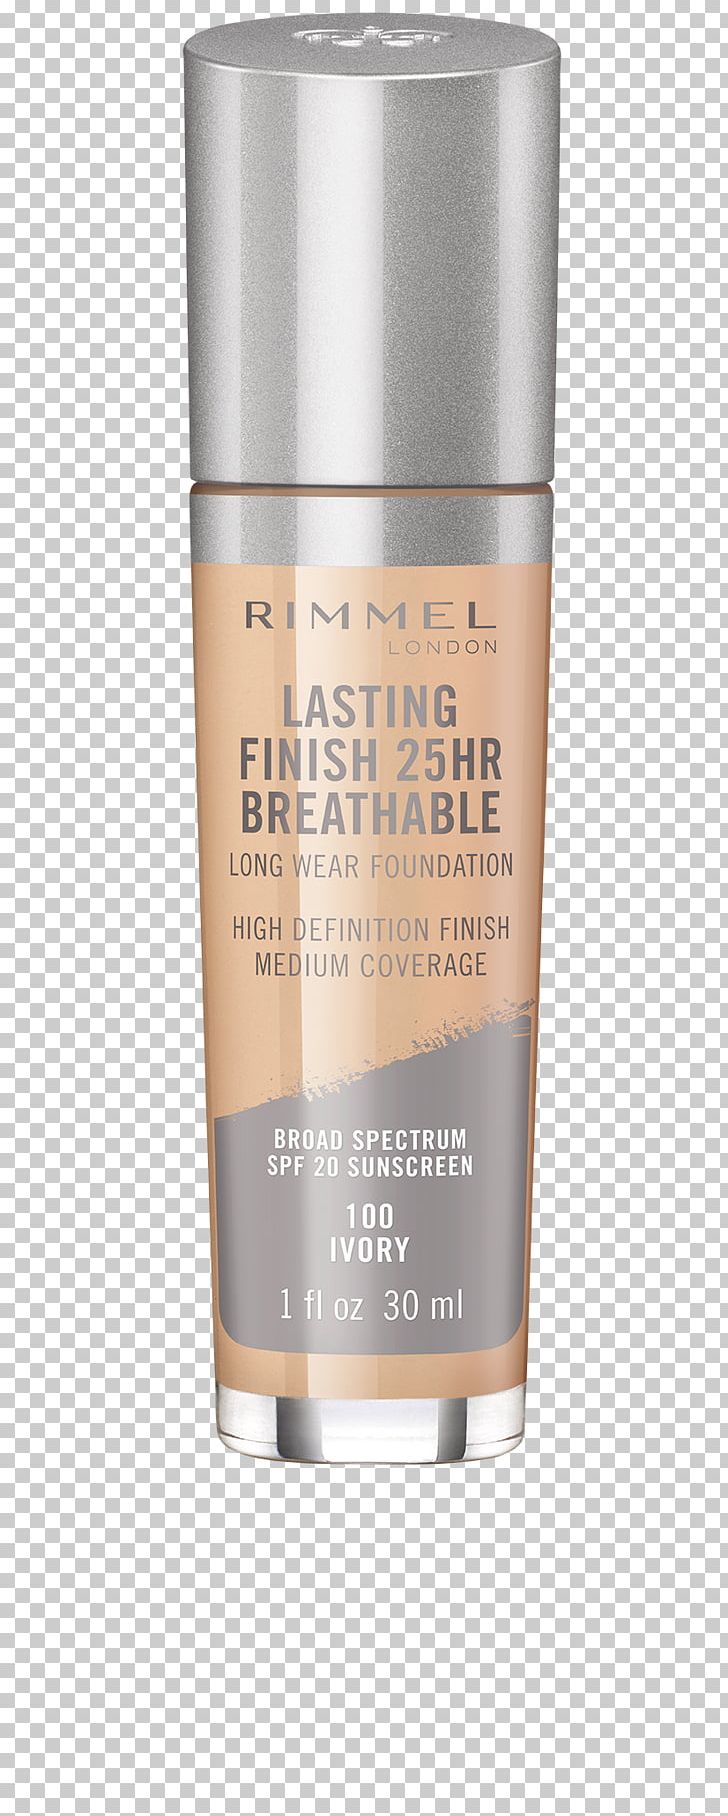 Rimmel Lasting Finish Foundation Rimmel Lasting Finish Foundation Cosmetics Rimmel London PNG, Clipart, Concealer, Cosmetics, Covergirl, Cream, Eye Shadow Free PNG Download